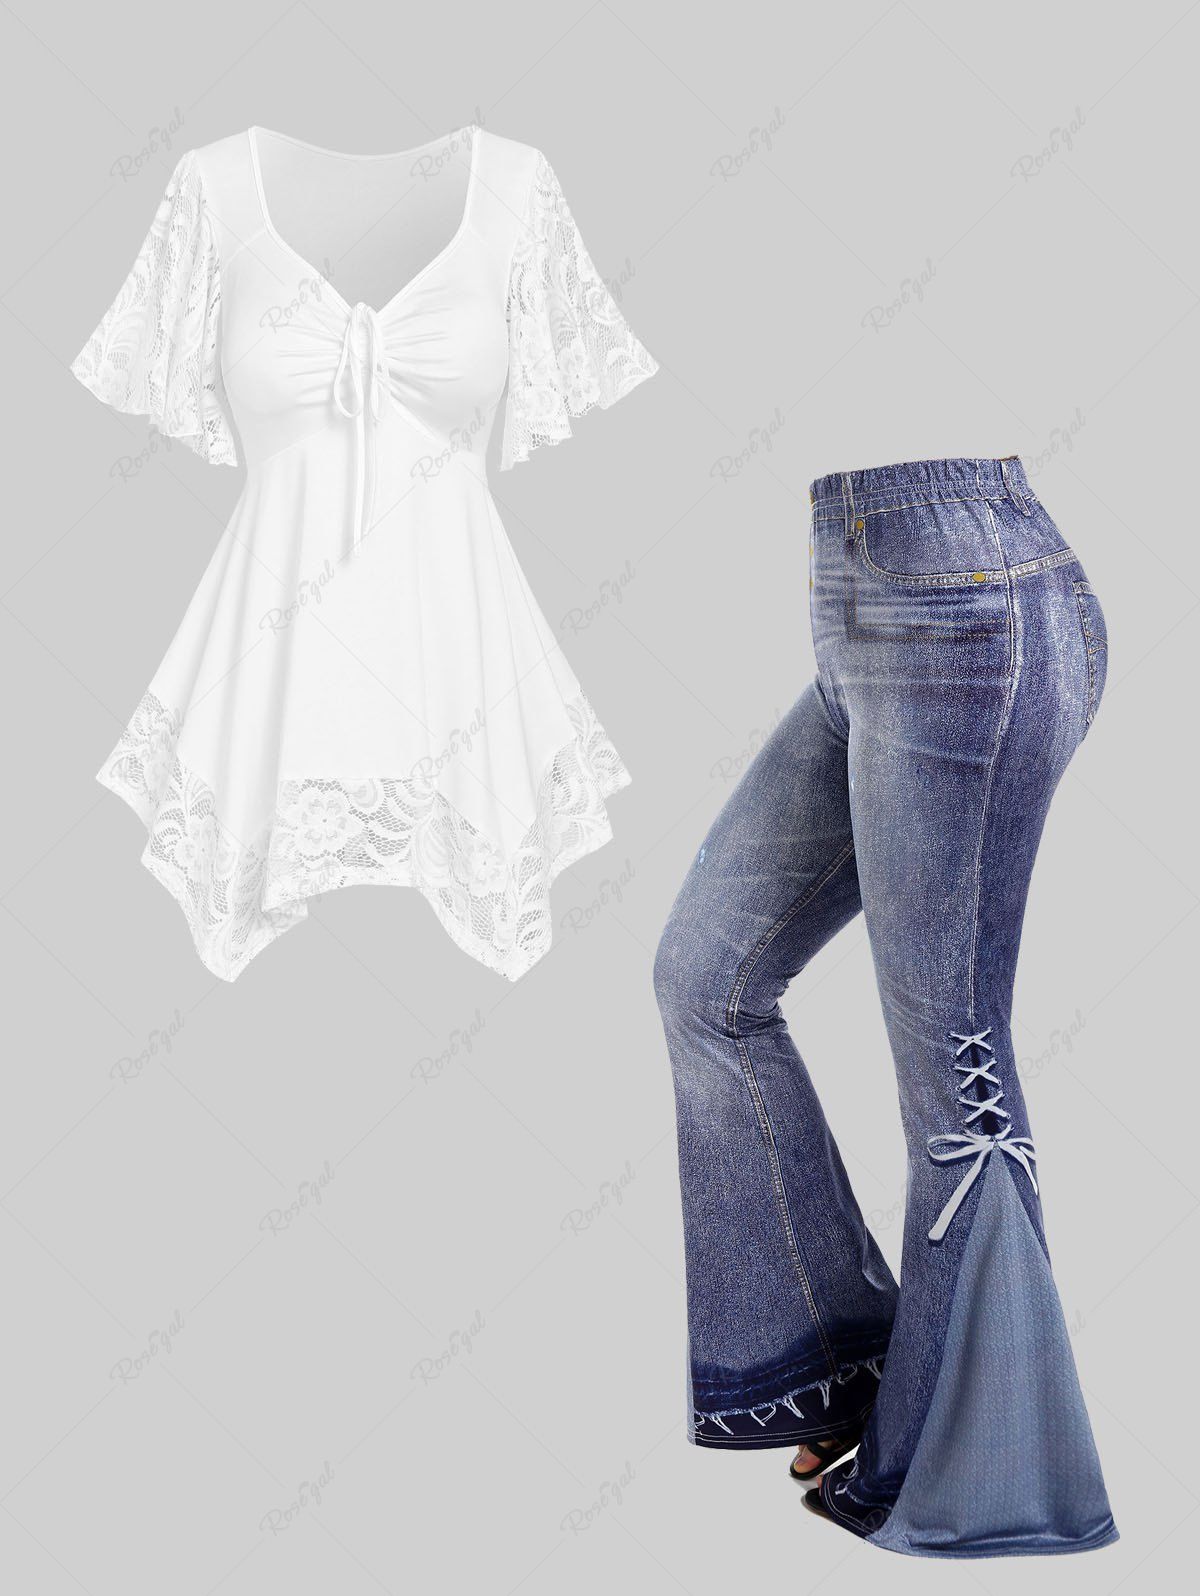 Discount Flower Lace Sleeve Handkerchief T Shirt and 3D Jeans Lace-up Pattern Printed Flare Pants Plus Size Outfits  